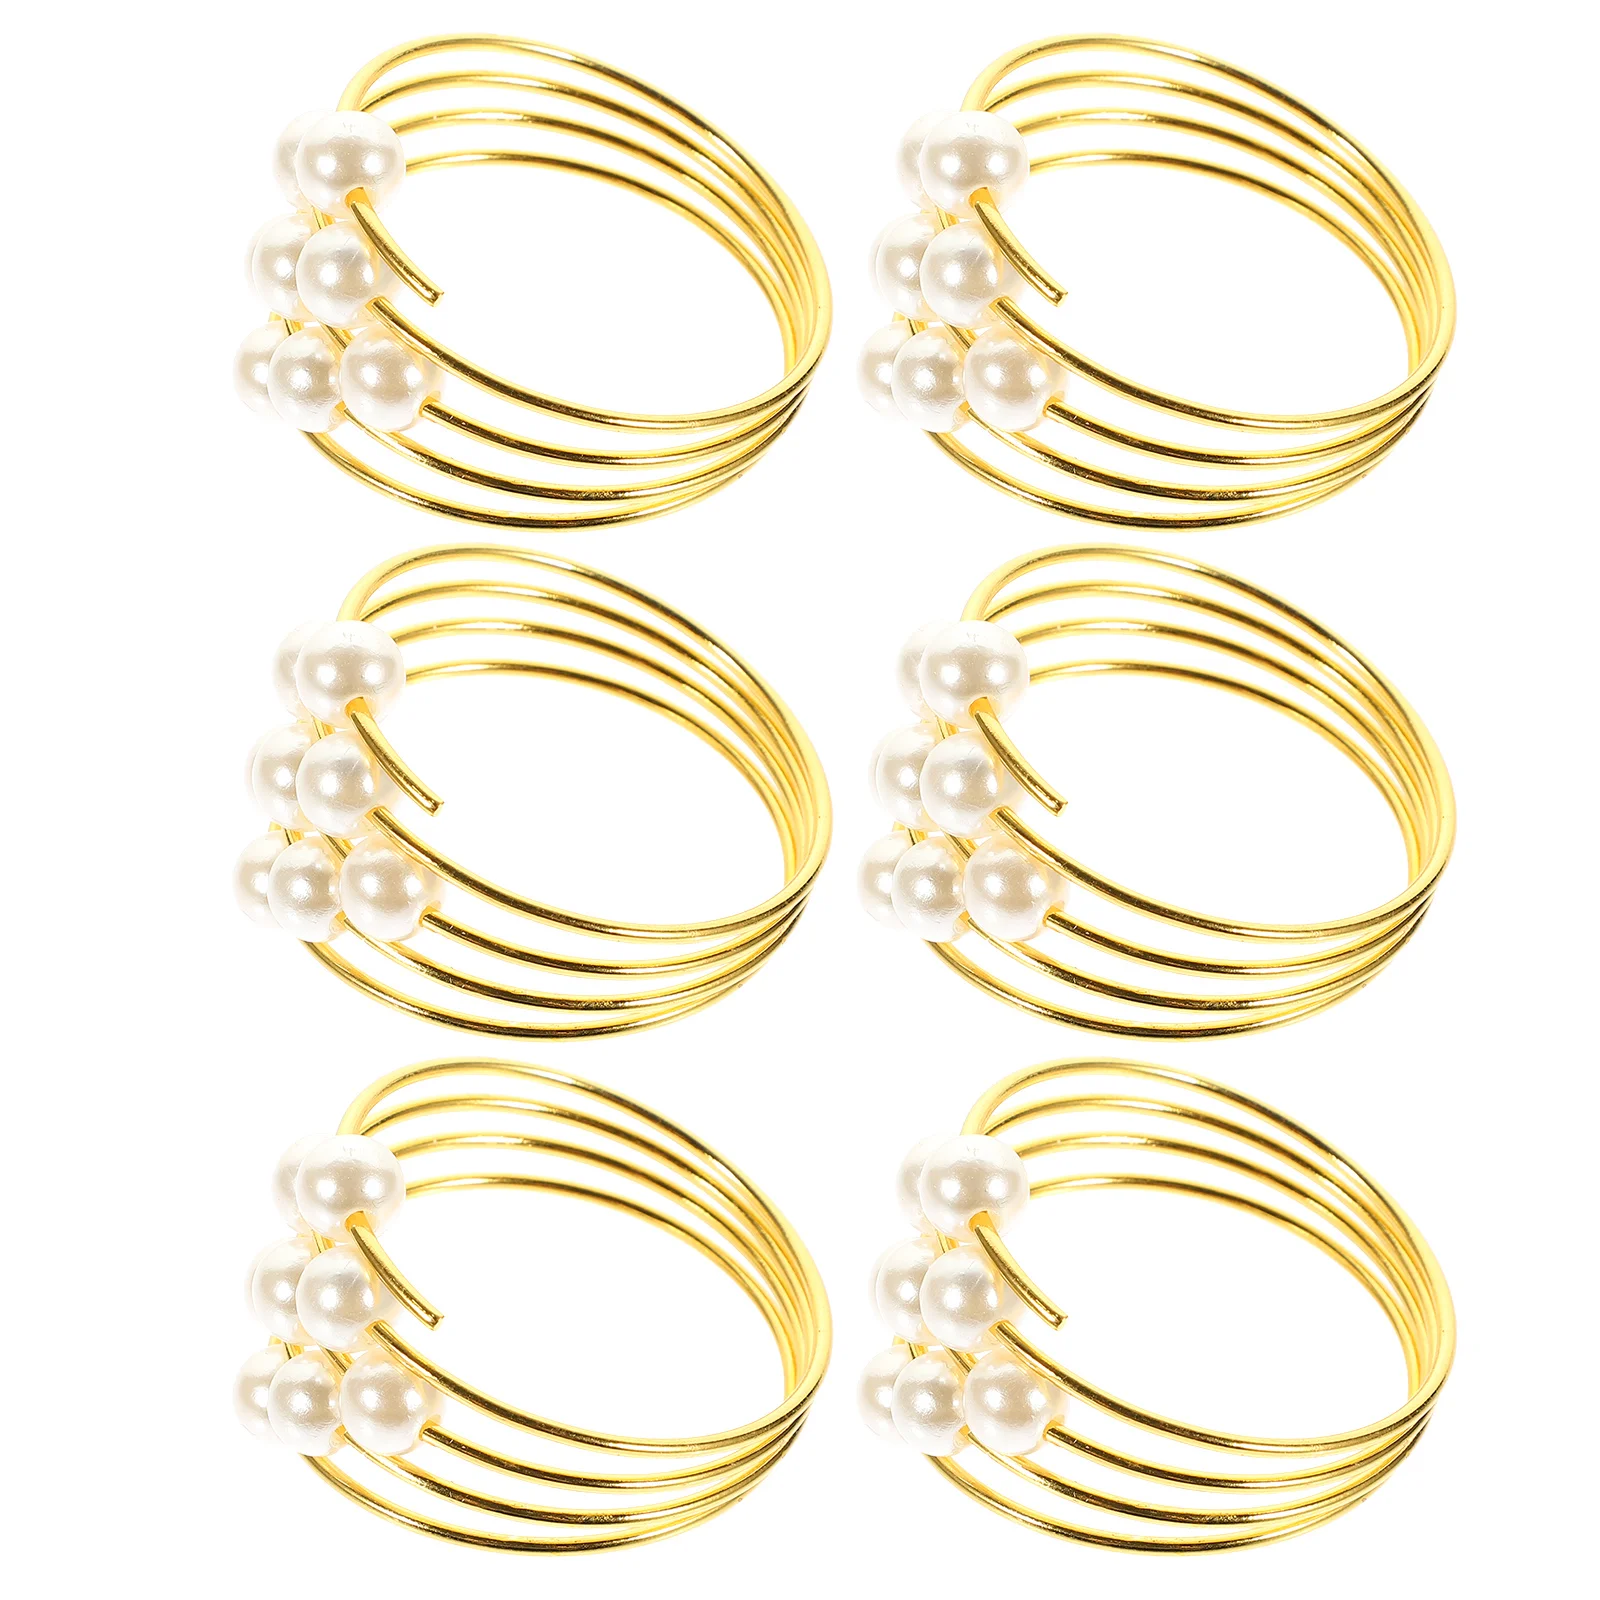 

Napkin Rings Buckles Serviette Pearl Ring Holders Buckle Holder Decorative Tissue Stainless Steel Metal Delicate Decors